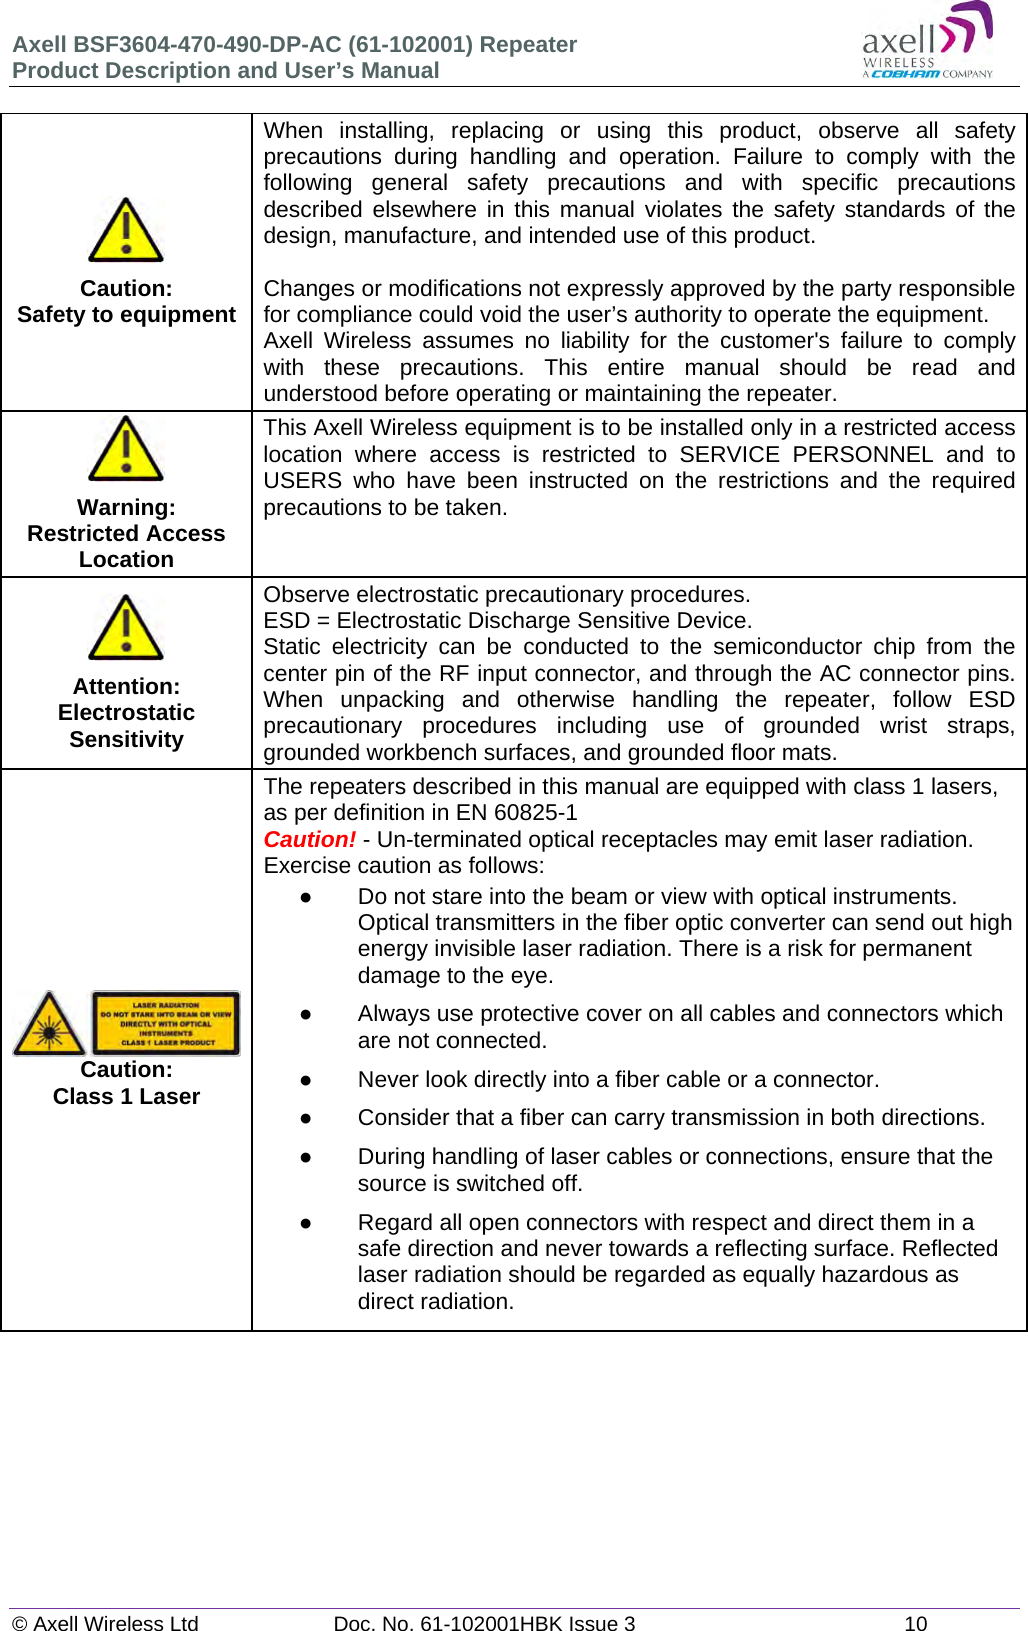 Axell BSF3604-470-490-DP-AC (61-102001) Repeater Product Description and User’s Manual © Axell Wireless Ltd  Doc. No. 61-102001HBK Issue 3  10   Caution: Safety to equipmentWhen installing, replacing or using this product, observe all safety precautions during handling and operation. Failure to comply with the following general safety precautions and with specific precautions described elsewhere in this manual violates the safety standards of the design, manufacture, and intended use of this product.   Changes or modifications not expressly approved by the party responsible for compliance could void the user’s authority to operate the equipment. Axell Wireless assumes no liability for the customer&apos;s failure to comply with these precautions. This entire manual should be read and understood before operating or maintaining the repeater.Warning: Restricted Access LocationThis Axell Wireless equipment is to be installed only in a restricted access location where access is restricted to SERVICE PERSONNEL and to USERS who have been instructed on the restrictions and the required precautions to be taken.Attention: Electrostatic SensitivityObserve electrostatic precautionary procedures. ESD = Electrostatic Discharge Sensitive Device.  Static electricity can be conducted to the semiconductor chip from the center pin of the RF input connector, and through the AC connector pins. When unpacking and otherwise handling the repeater, follow ESD precautionary procedures including use of grounded wrist straps, grounded workbench surfaces, and grounded floor mats. Caution: Class 1 Laser The repeaters described in this manual are equipped with class 1 lasers, as per definition in EN 60825-1 Caution! - Un-terminated optical receptacles may emit laser radiation. Exercise caution as follows:   Do not stare into the beam or view with optical instruments. Optical transmitters in the fiber optic converter can send out high energy invisible laser radiation. There is a risk for permanent damage to the eye.   Always use protective cover on all cables and connectors which are not connected.    Never look directly into a fiber cable or a connector.    Consider that a fiber can carry transmission in both directions.    During handling of laser cables or connections, ensure that the source is switched off.    Regard all open connectors with respect and direct them in a safe direction and never towards a reflecting surface. Reflected laser radiation should be regarded as equally hazardous as direct radiation.     